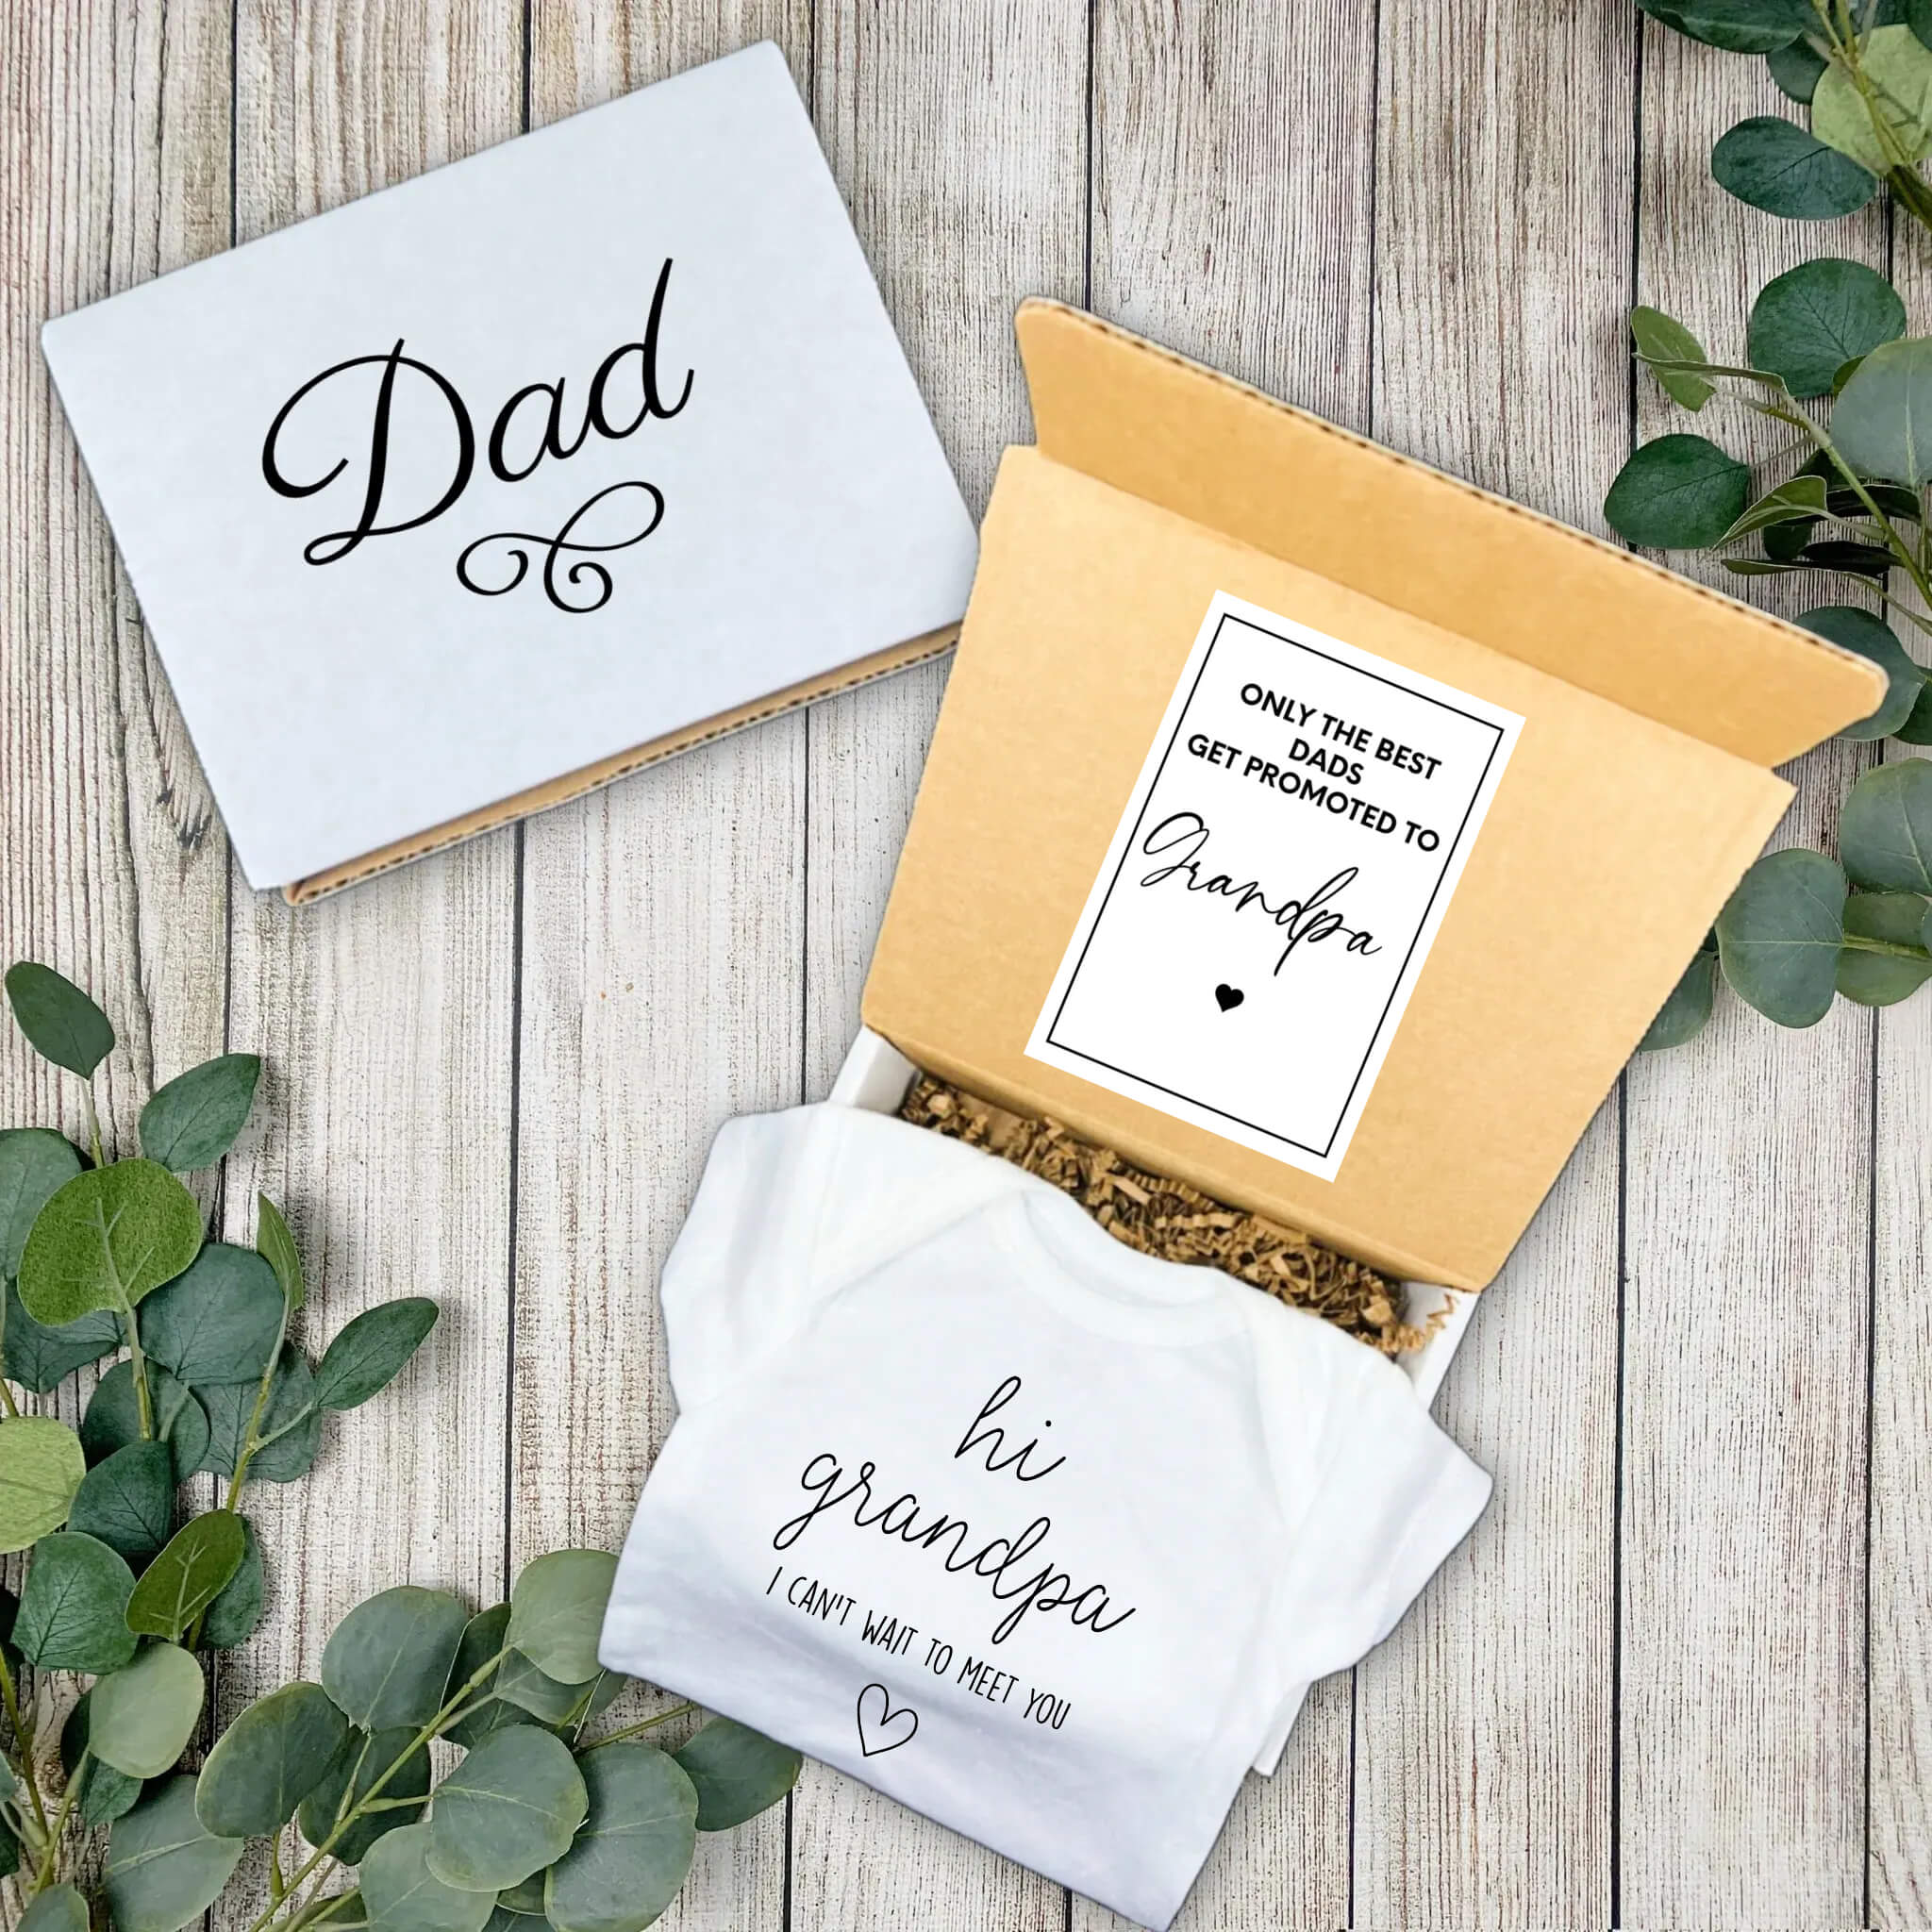 Buy New Dad to Be Gift Baby Birth Pregnancy Announcement Gifts for Husband  First Time Dad Mom Becoming a Daddy Mommy On Birthday Baby Reveal Gift  her'S Day for New her Future